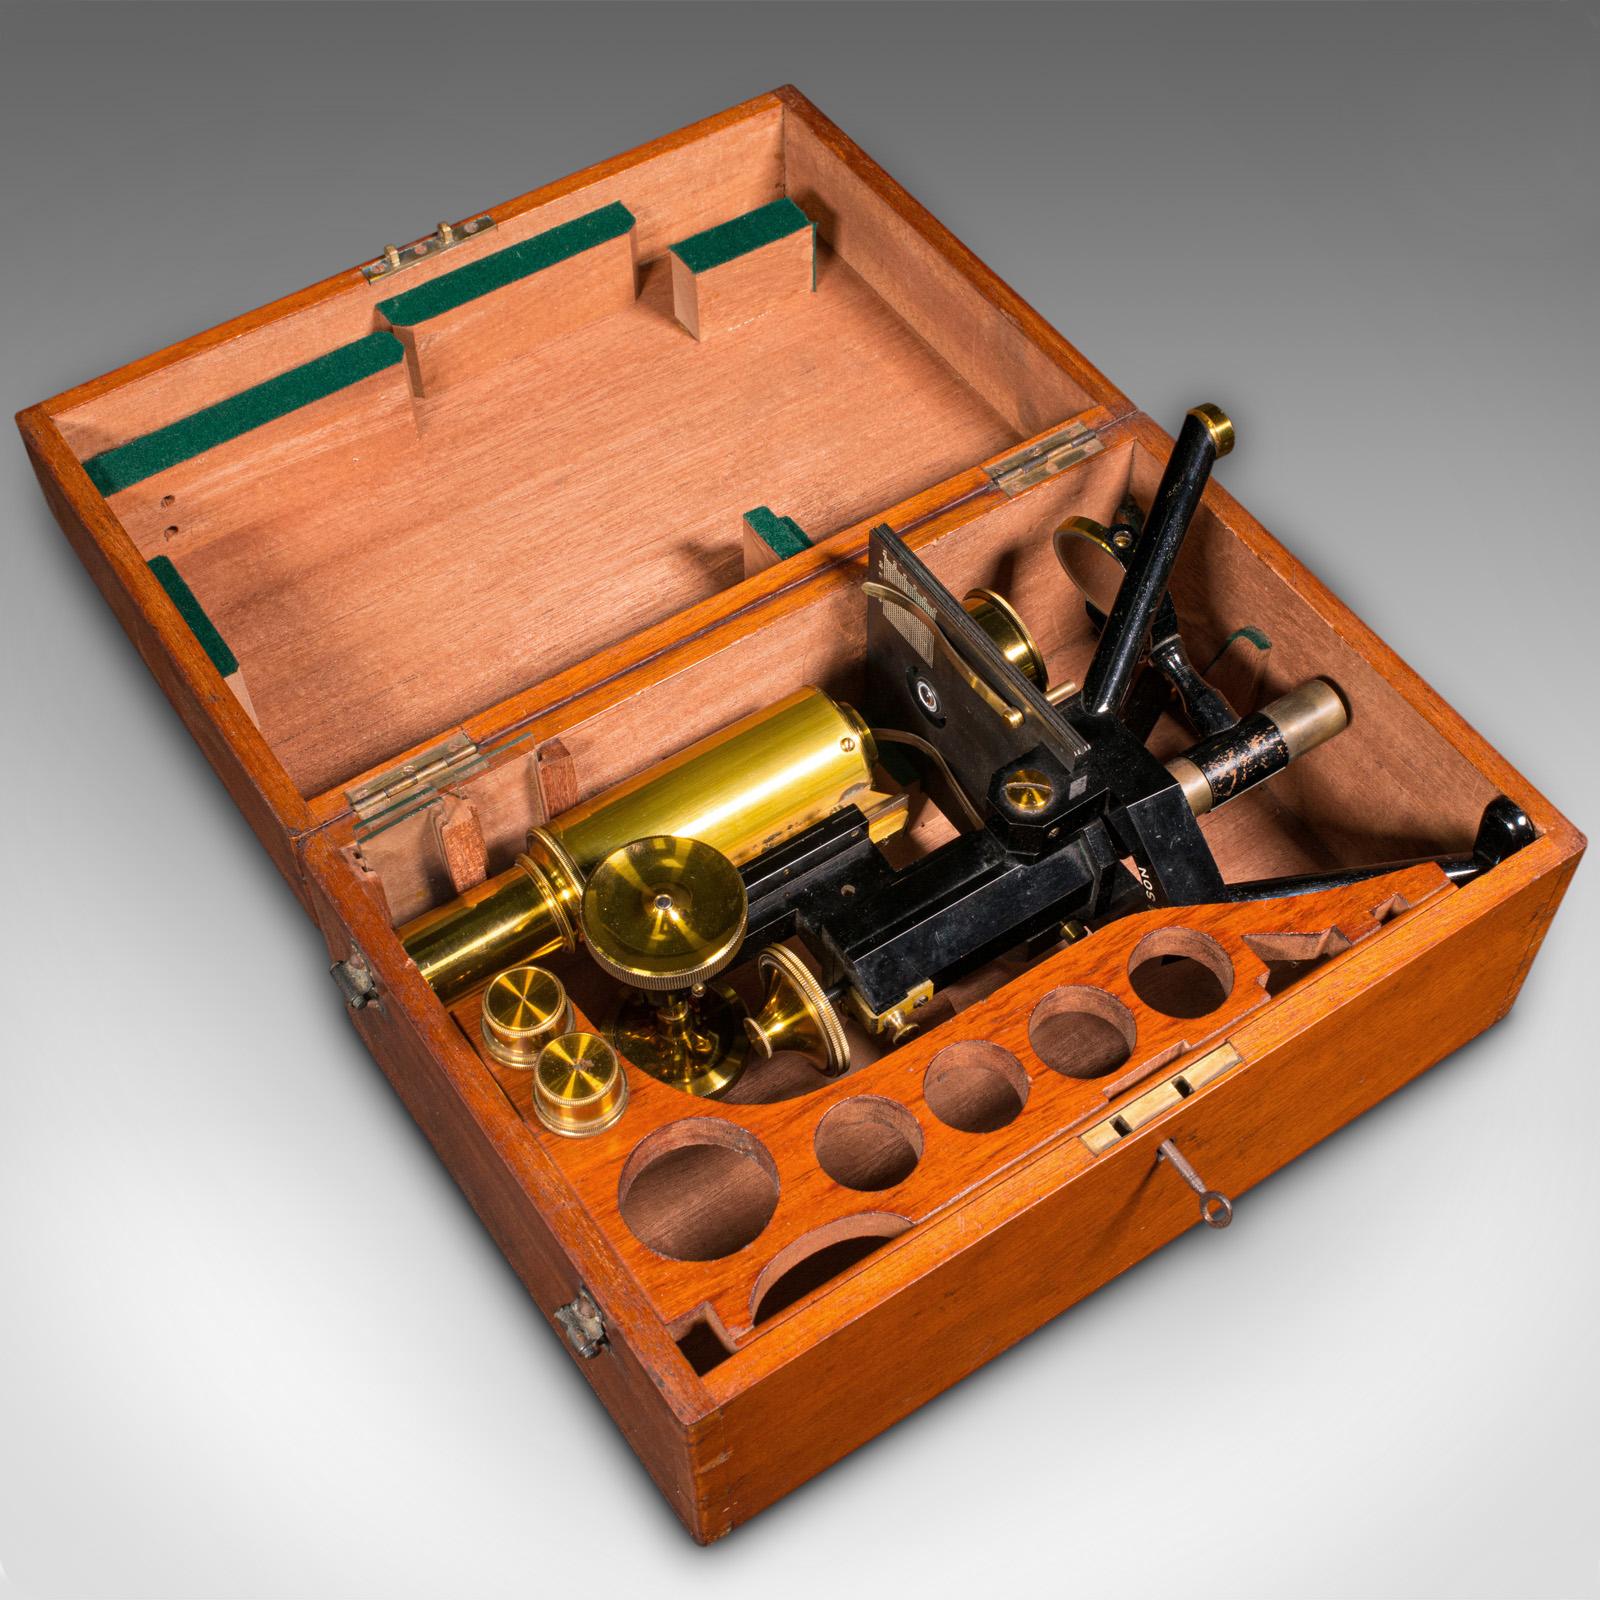 Antique Cased Microscope, English, Scientific Instrument, Swift & Son, Edwardian For Sale 3